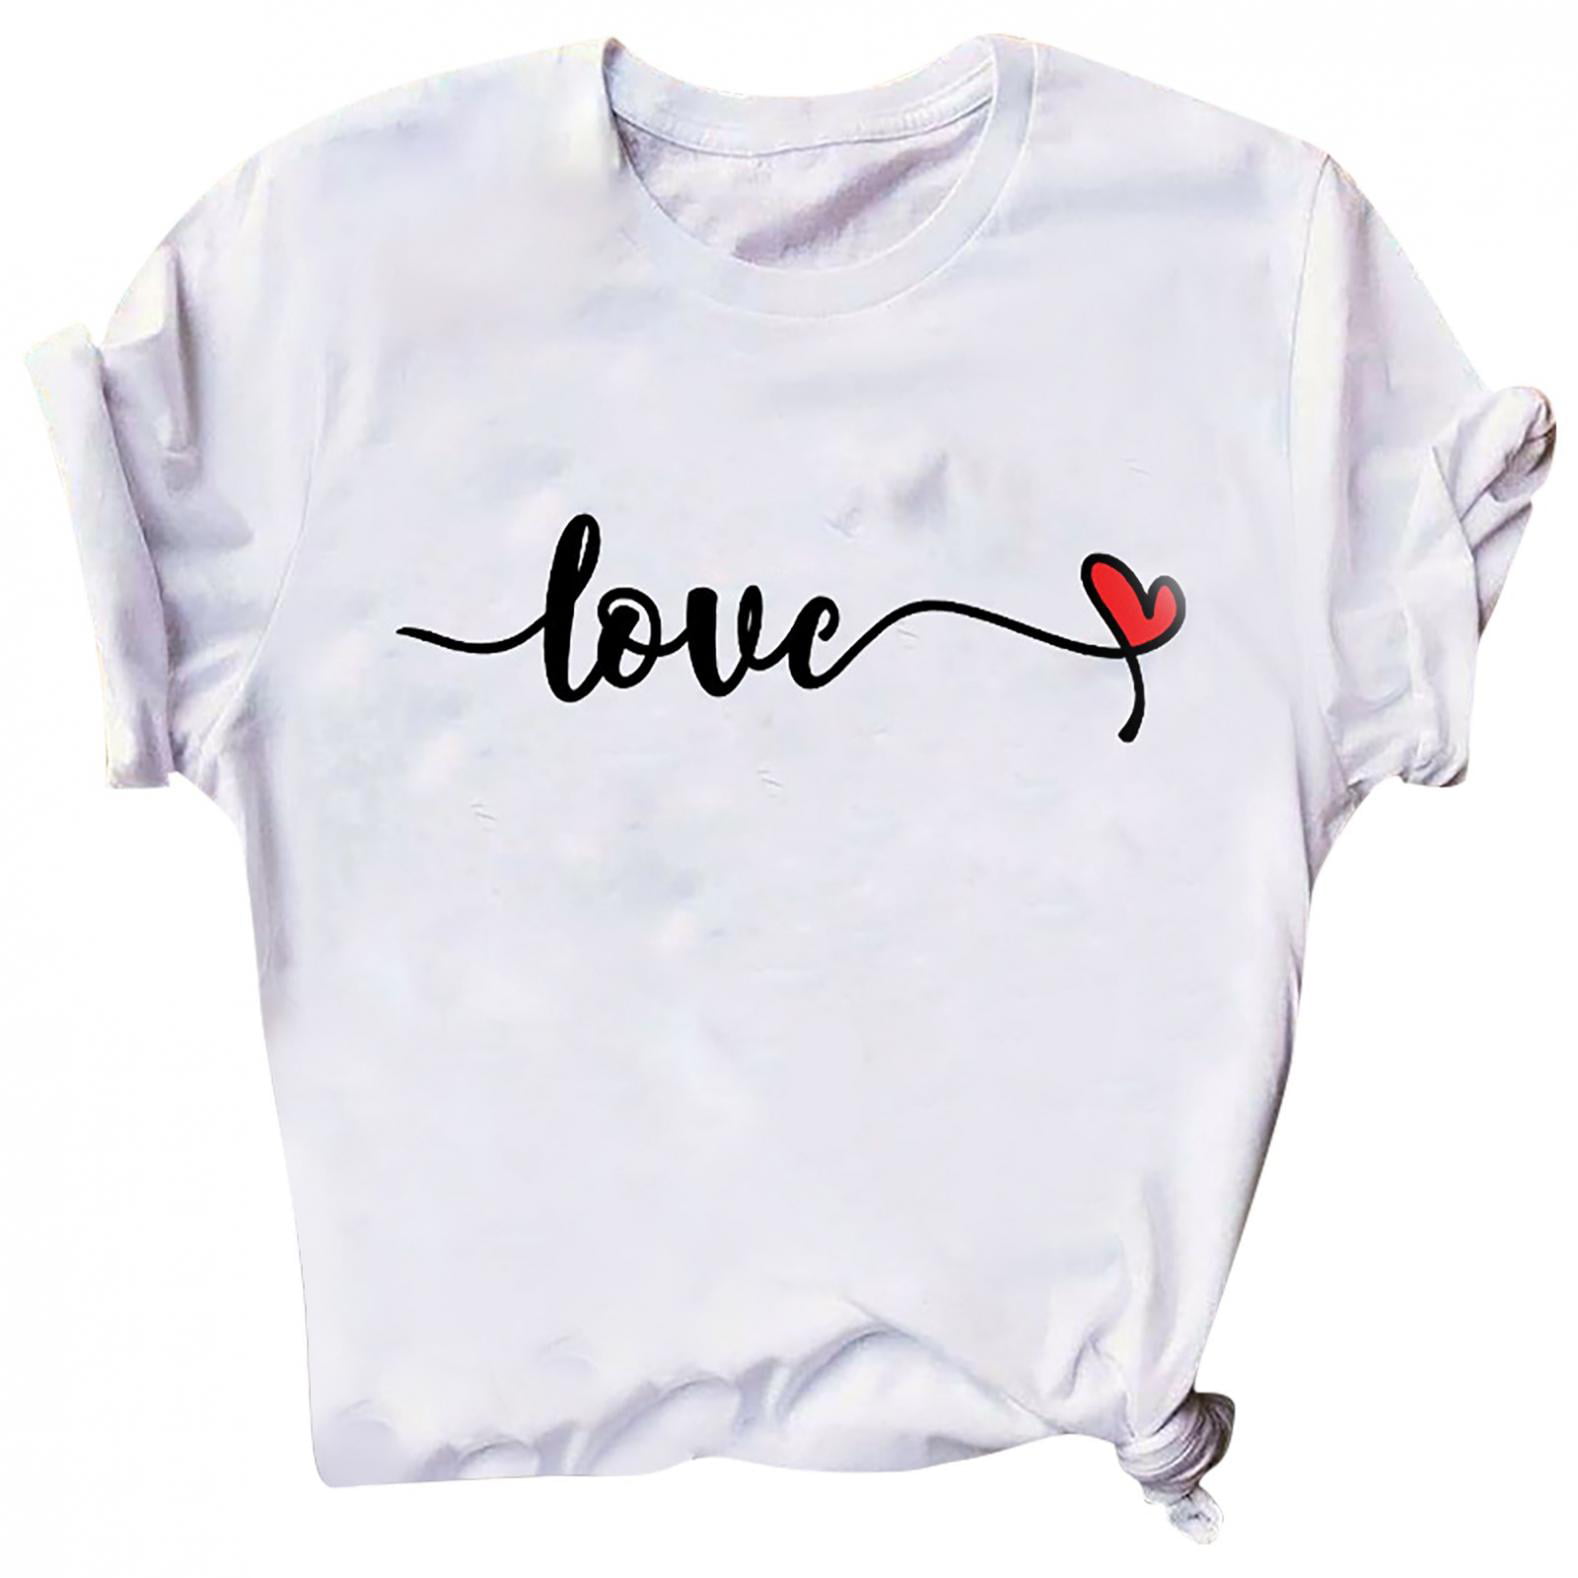 Couples Matching Graphic Tee Women Short Sleeve Round Neck Blouse Tops Valentines Day Shirts